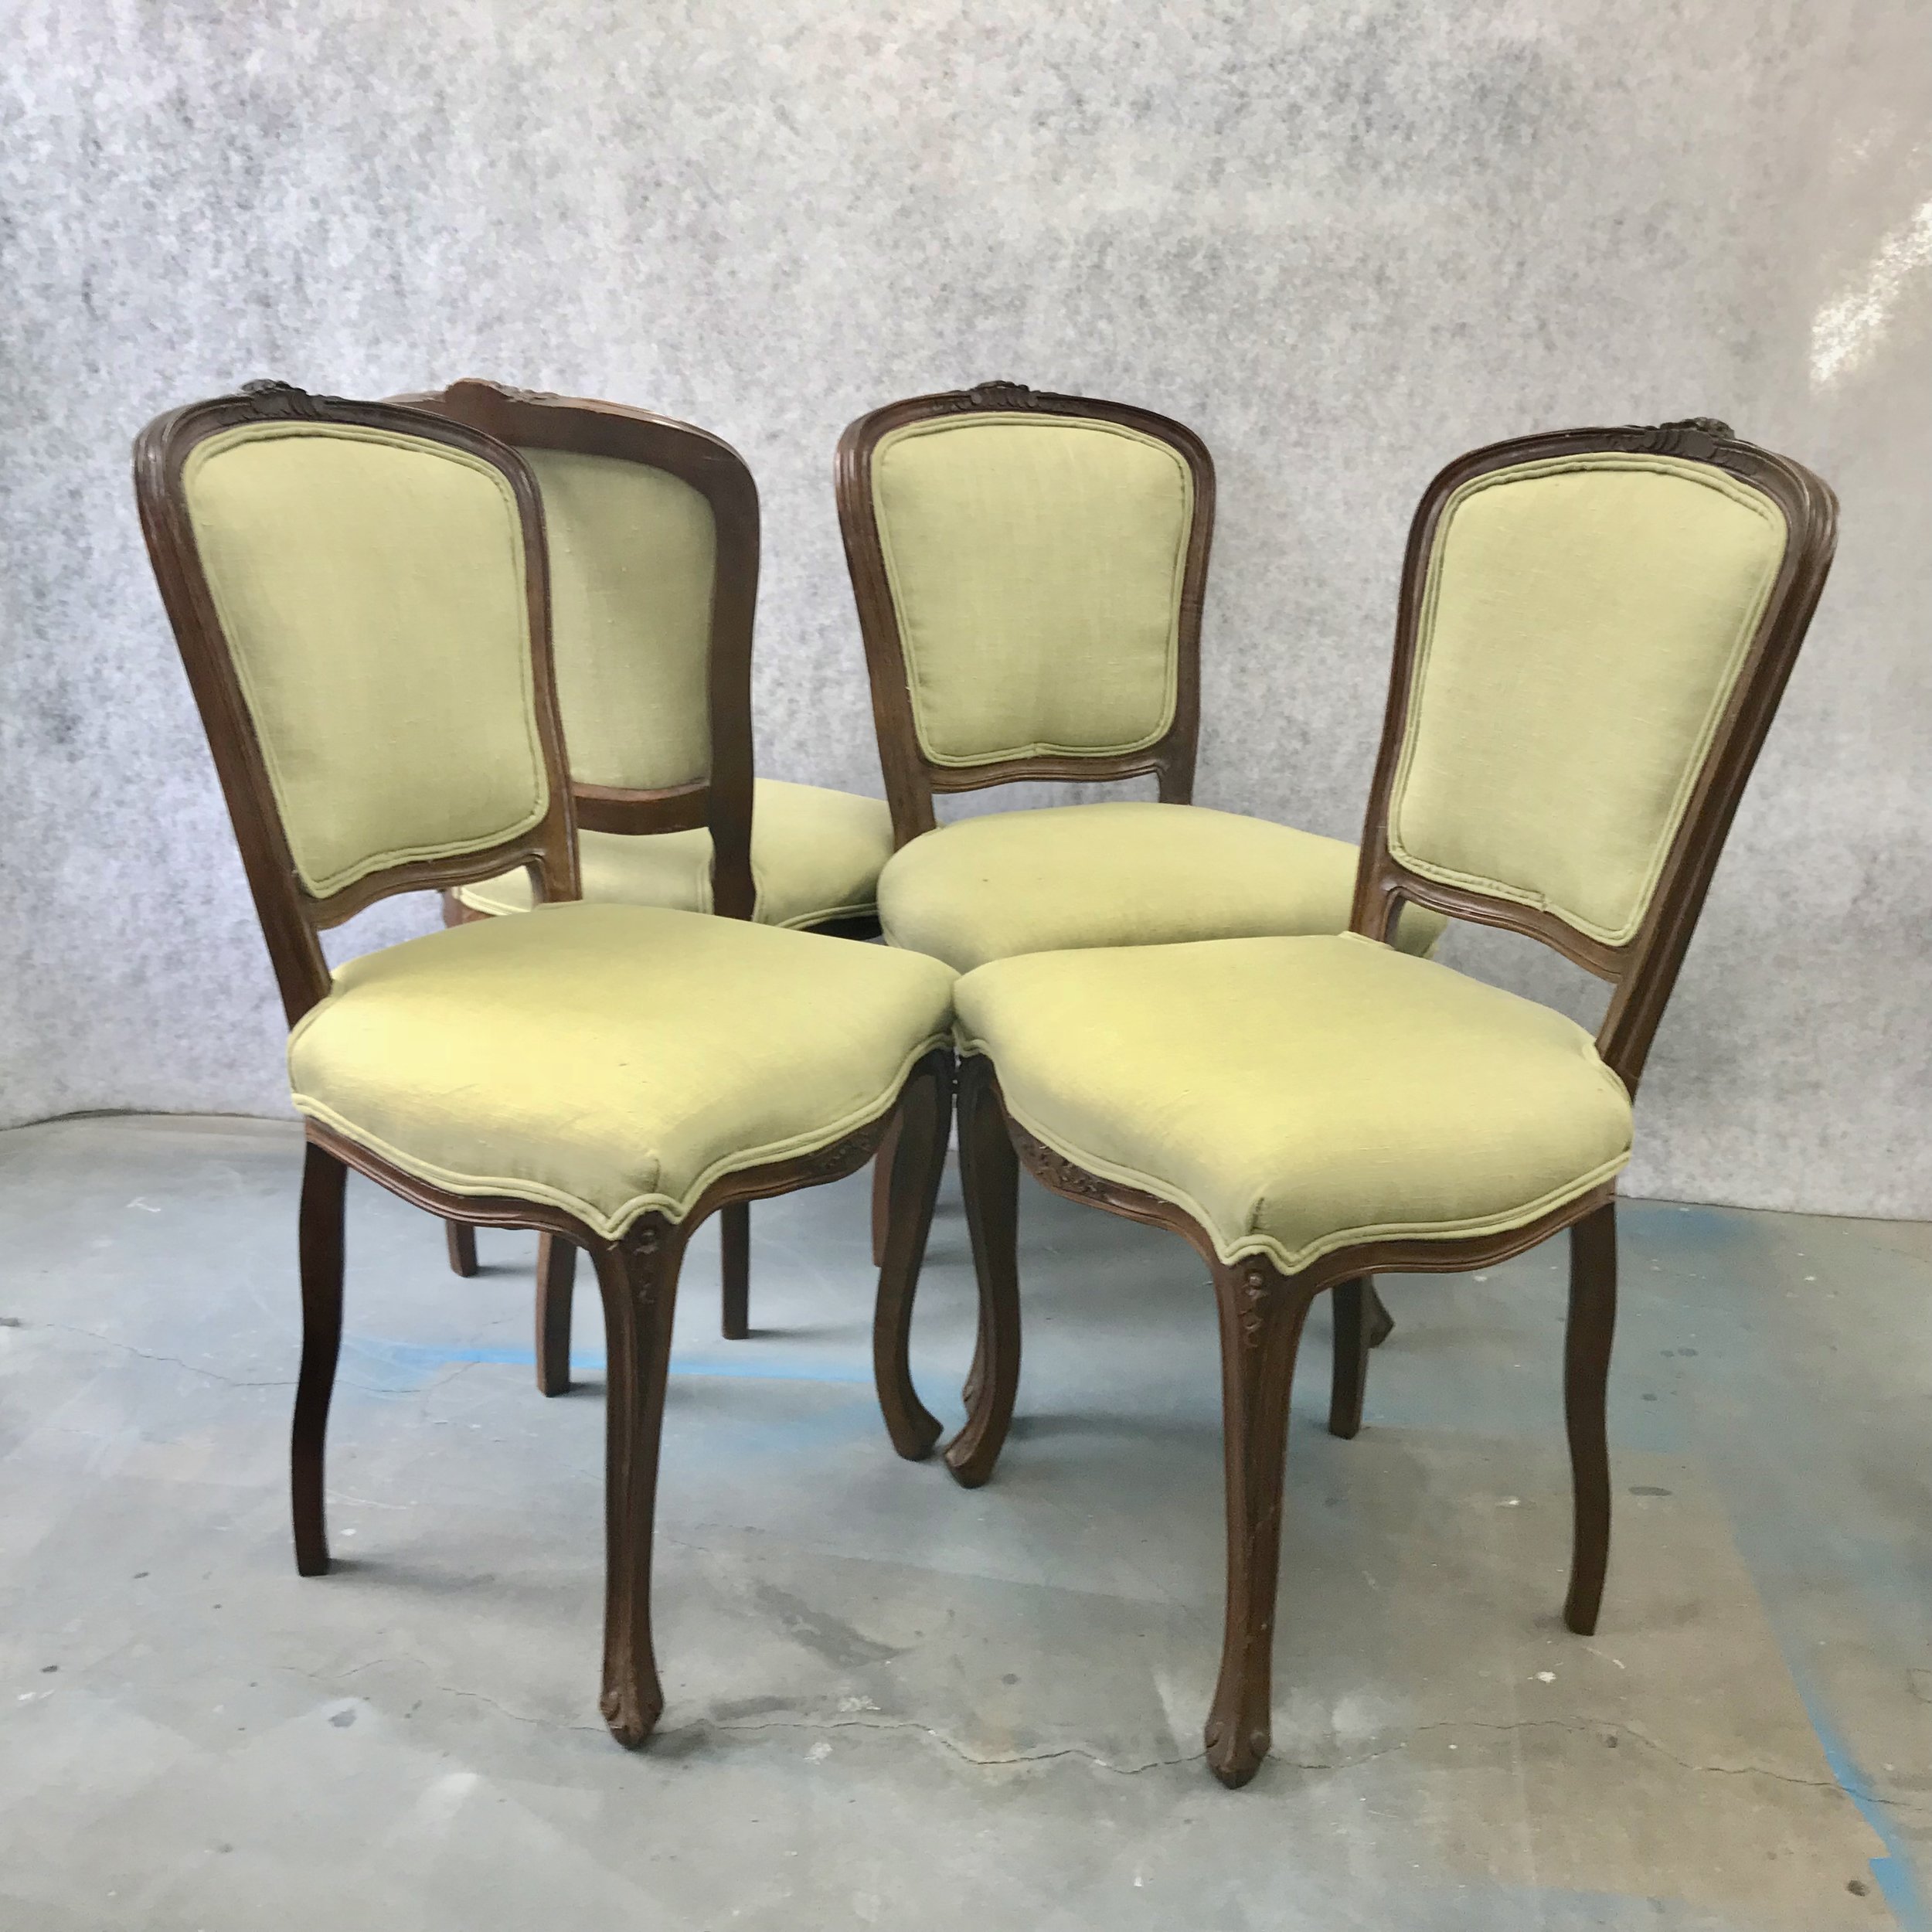 Vintage French Dining Chairs Set Of 4 City Girl Arts